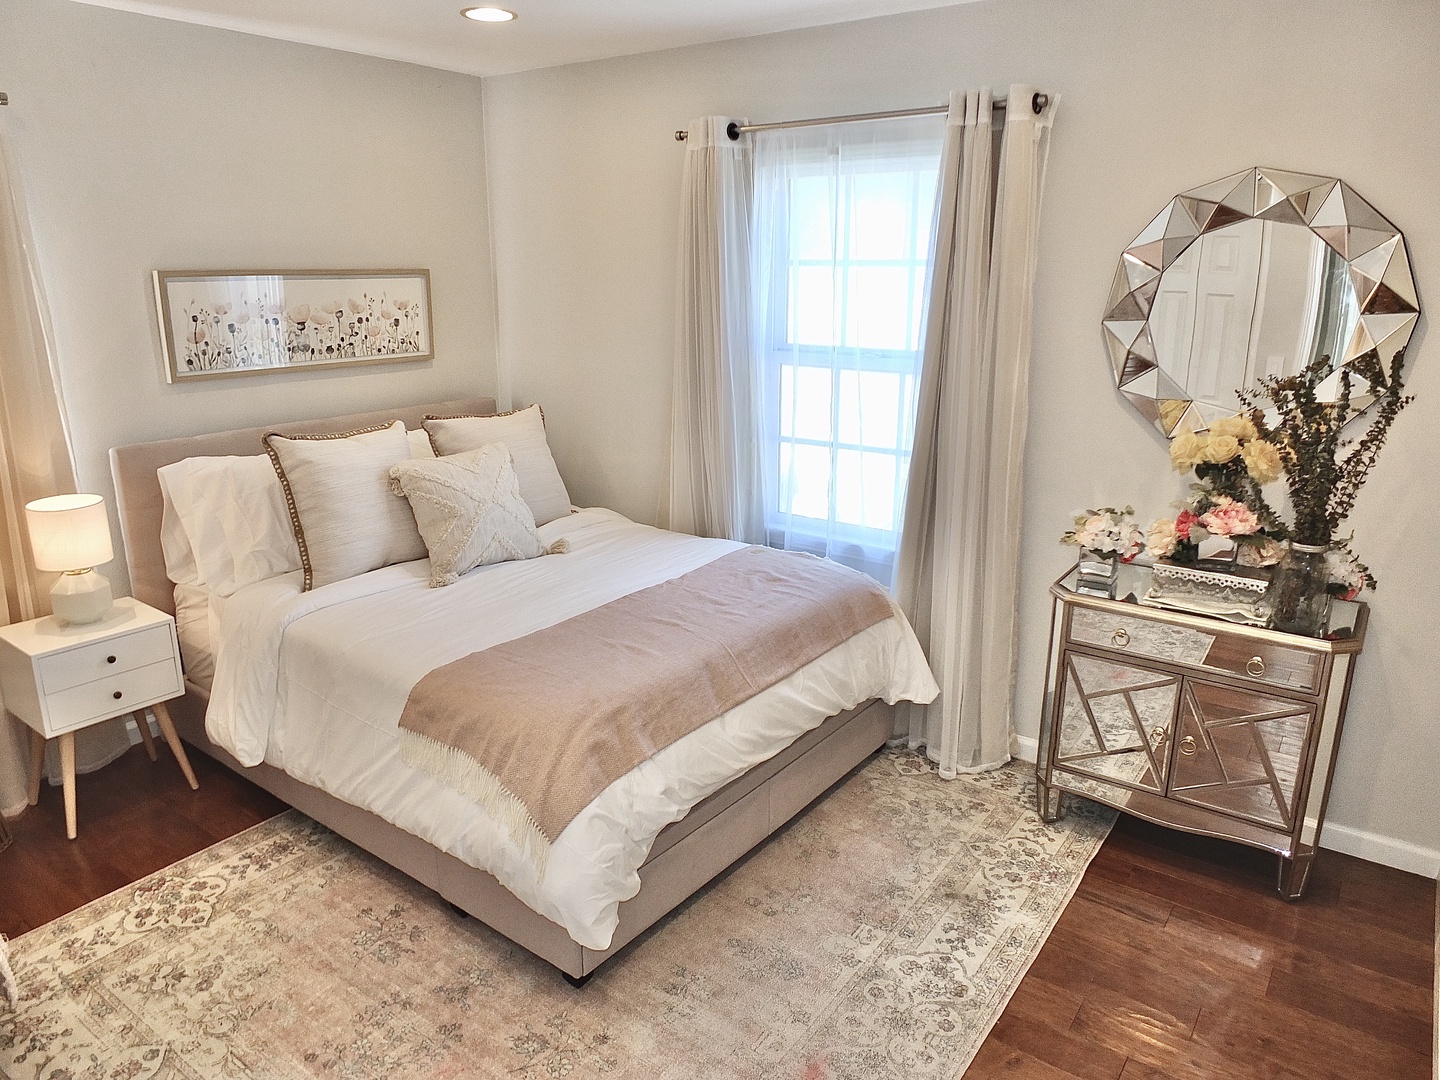 Relax in the second bedroom, featuring a queen bed & closet